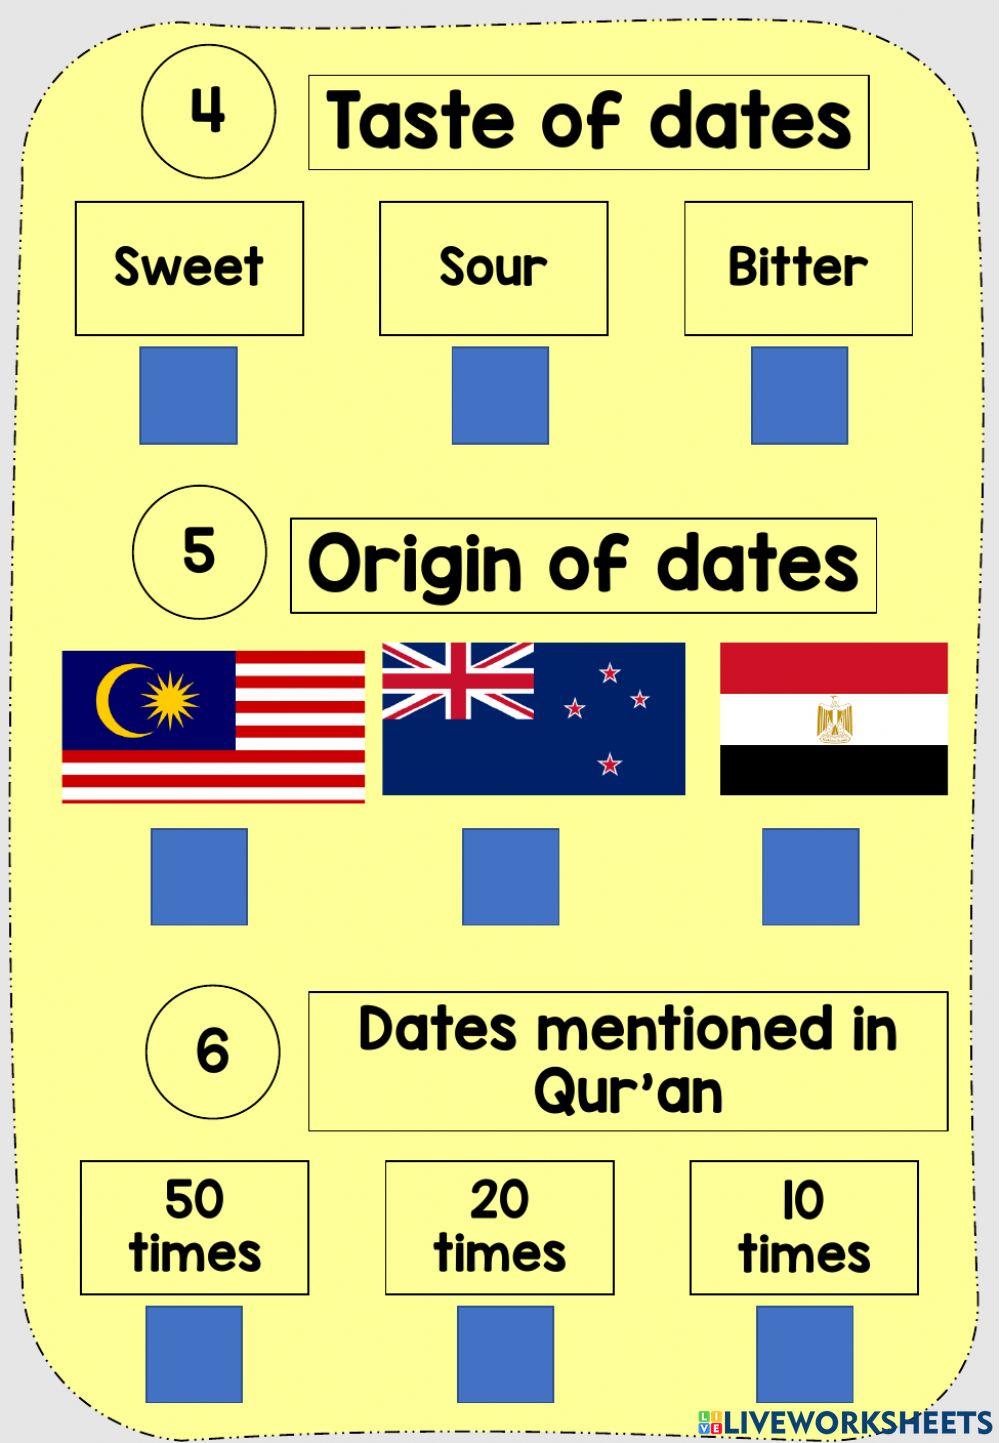 6 facts about dates